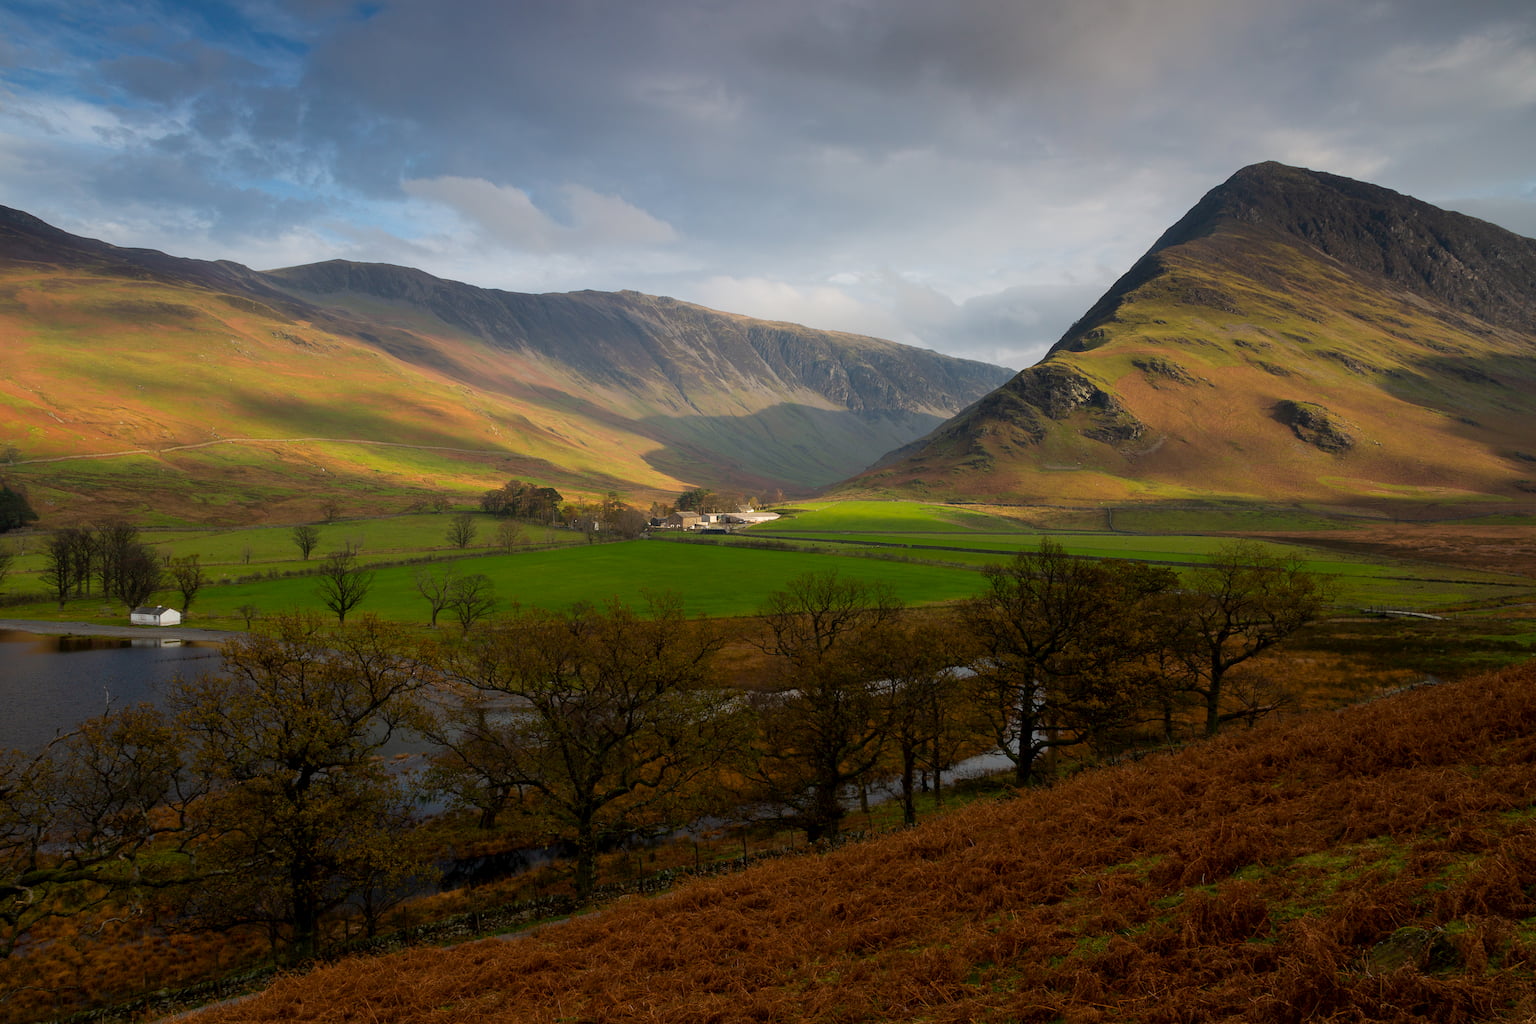 Gatesgarth Farm and Buttermere Fell at the southern end of Lake Buttermere in the Lake District.